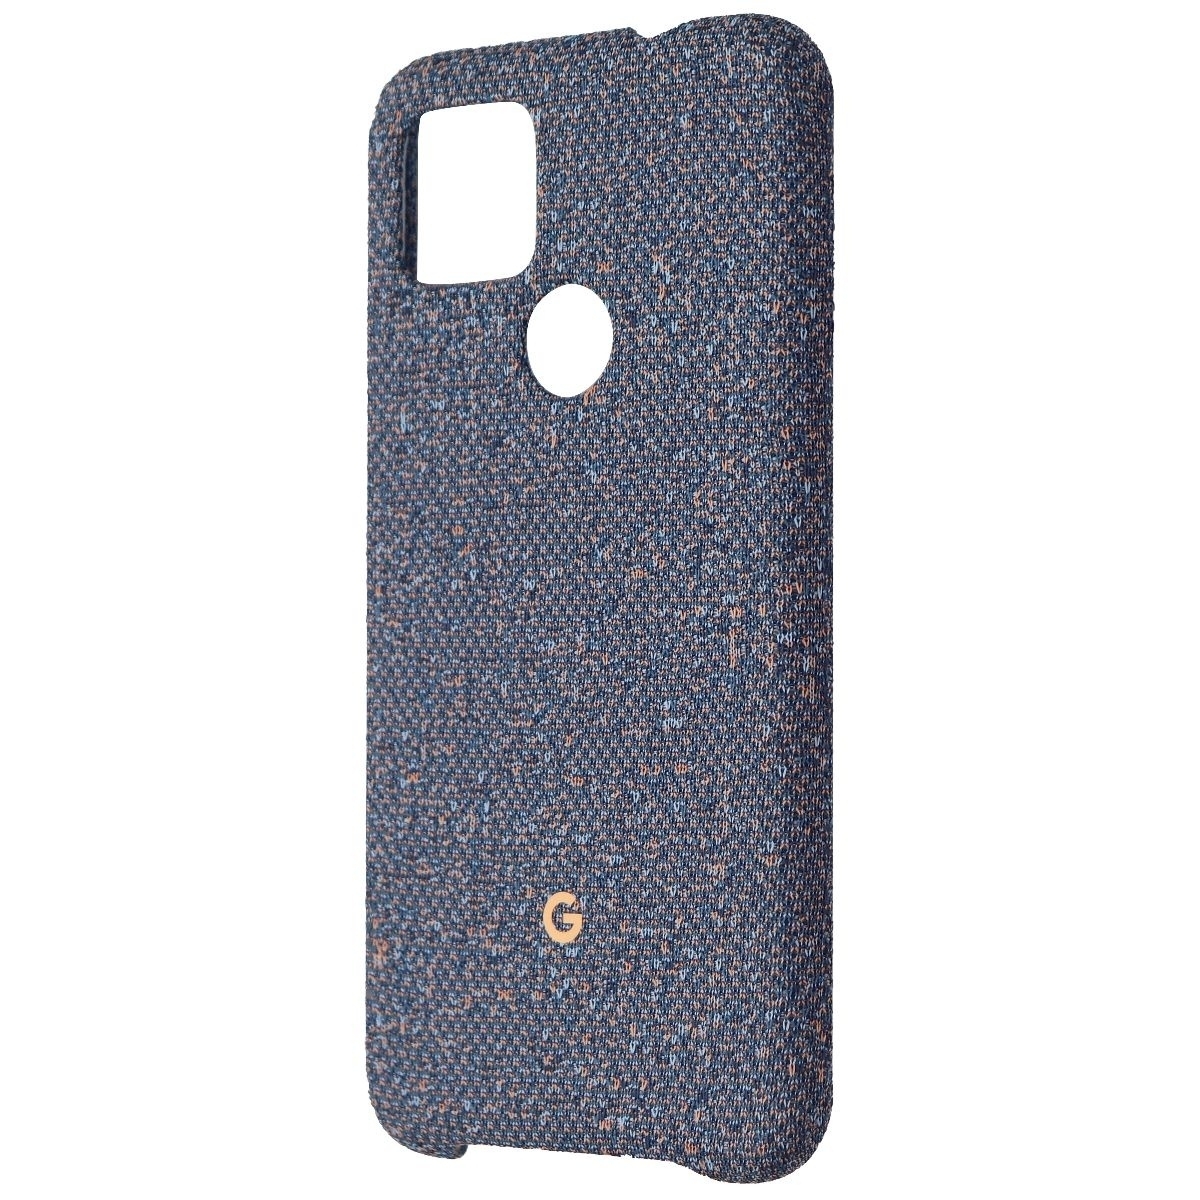 Google Official Fabric Case For Pixel 4a (5G) Smartphone - Blue Confetti